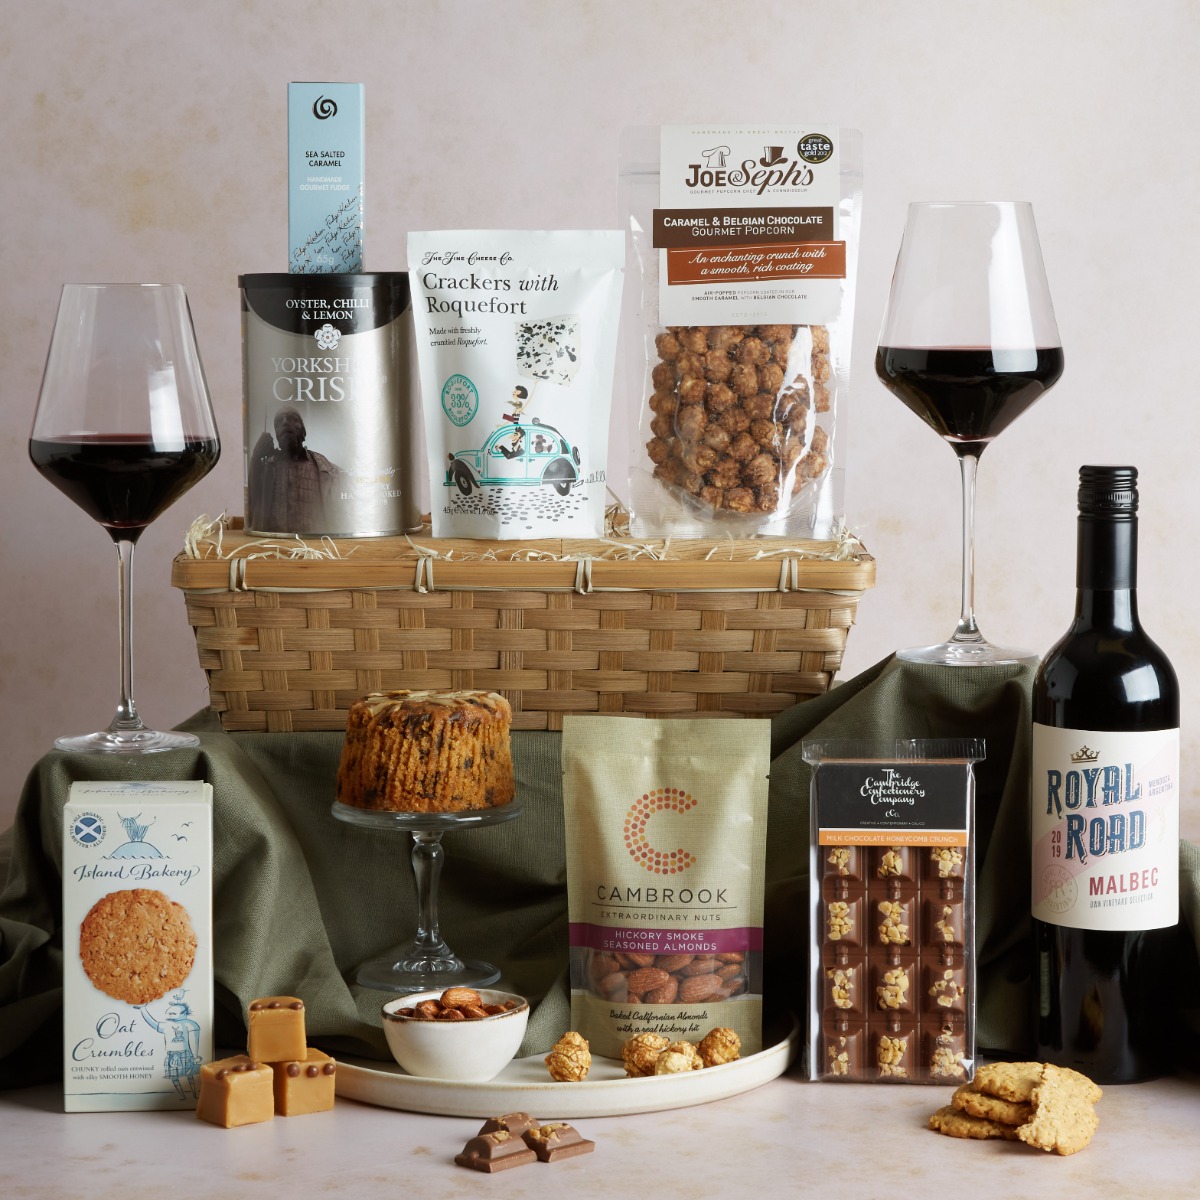 Gourmet Food and Wine Hamper with contents on display